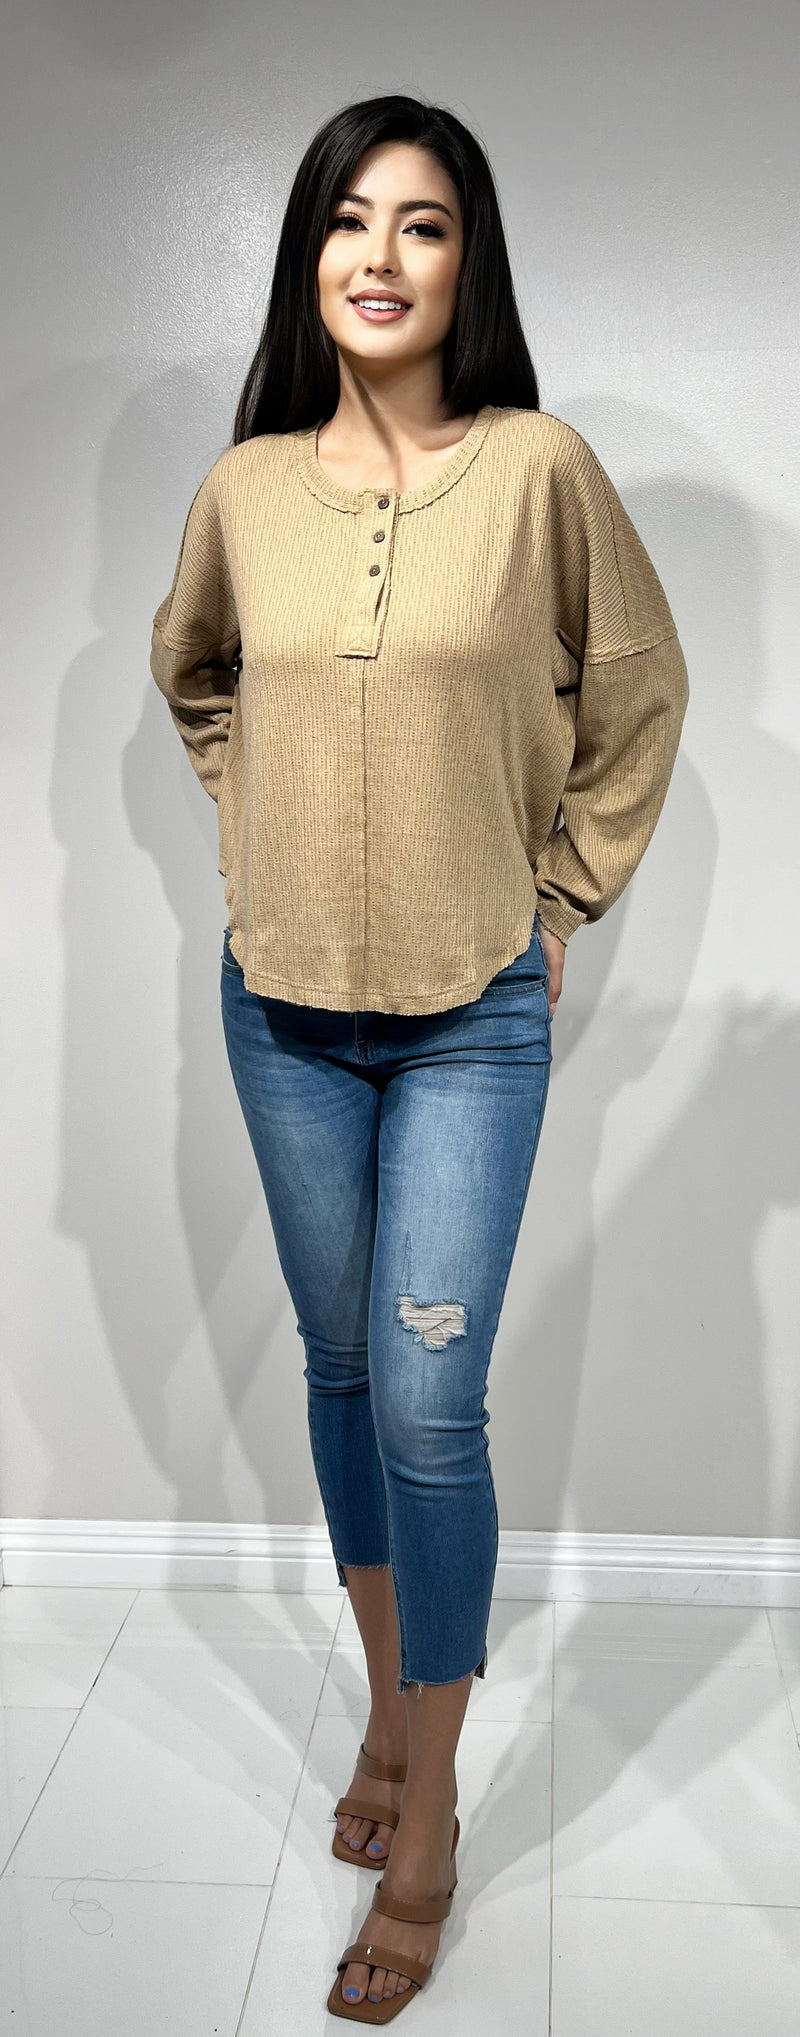 Jeans Warehouse Hawaii - 3/4 & L/S SOLID KNIT TOPS - DROP SHOULDER HENLEY TOP | By VERY J